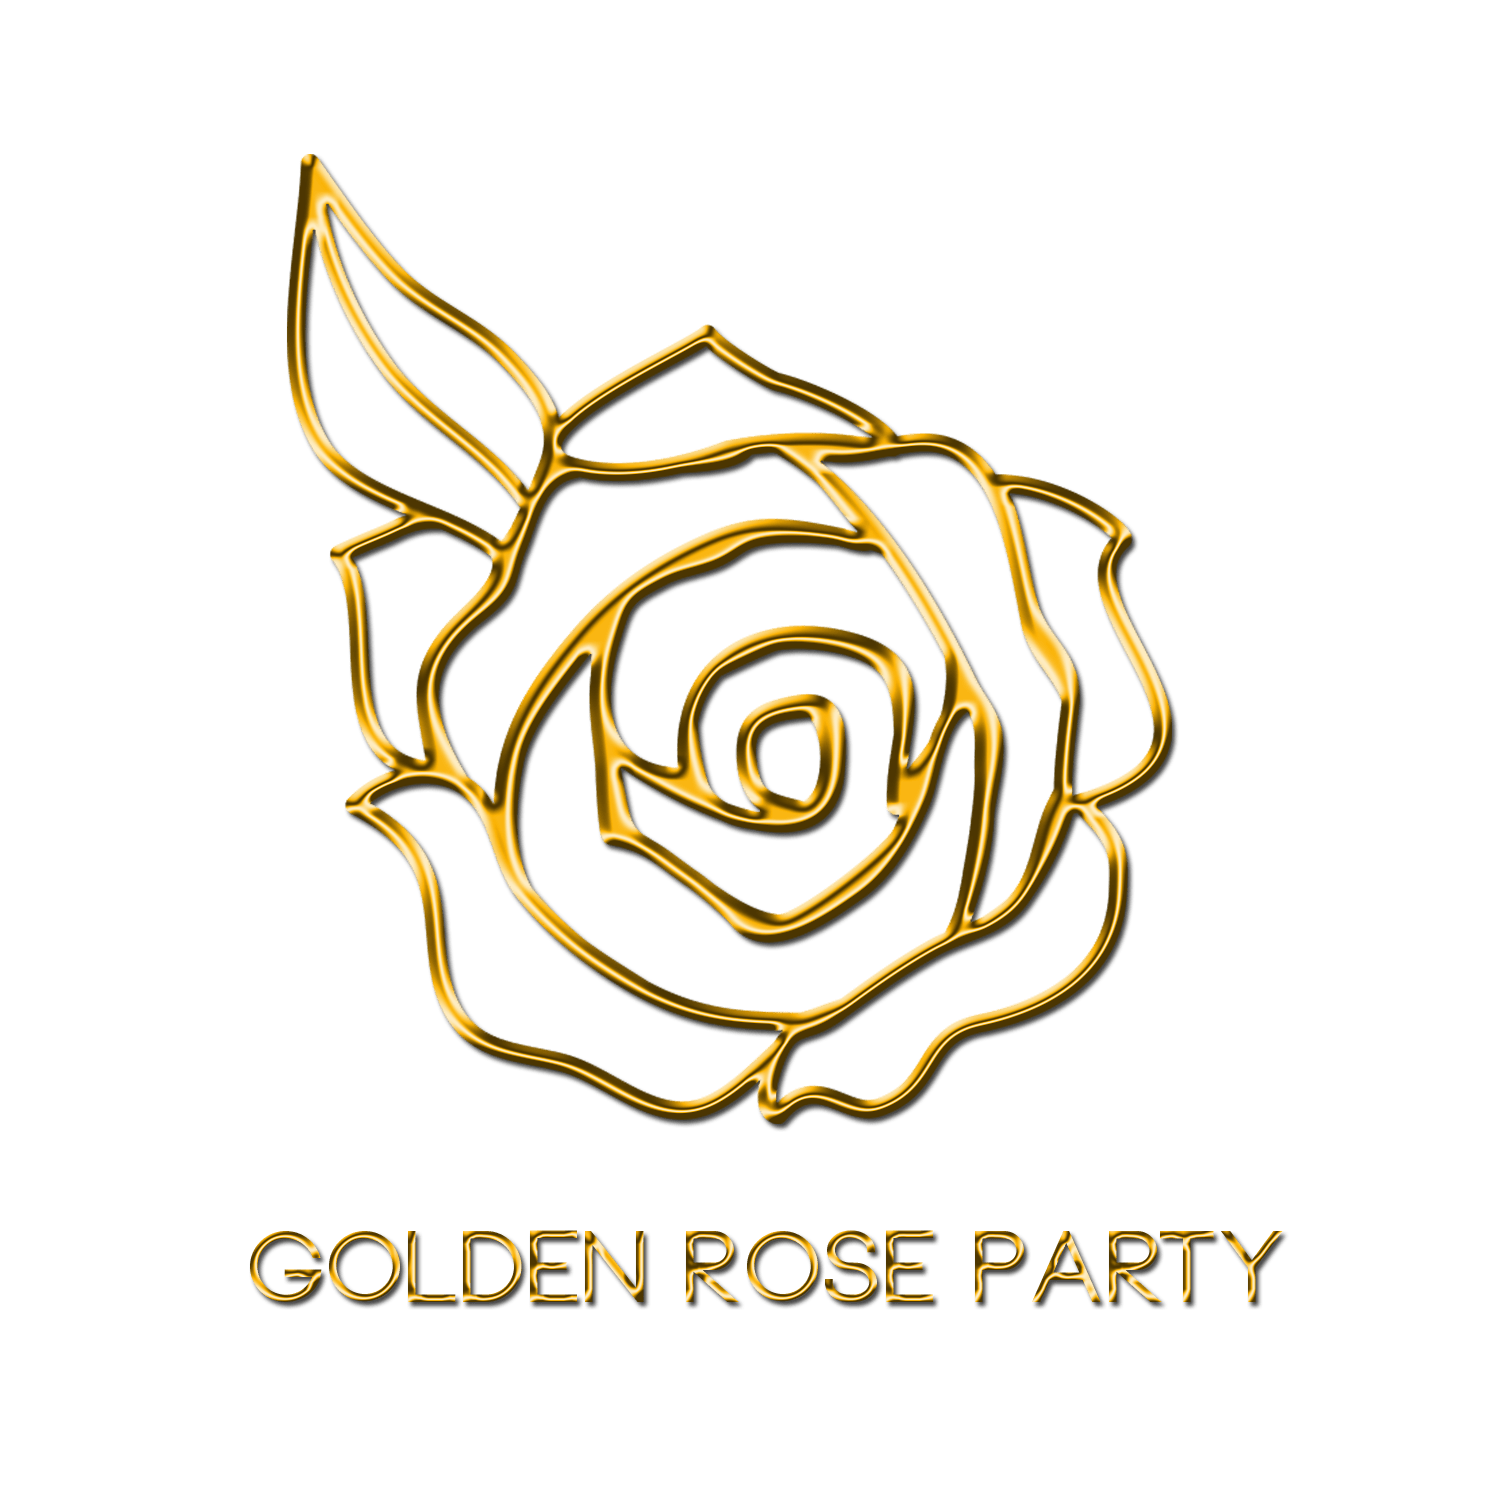 Golden Rose Party